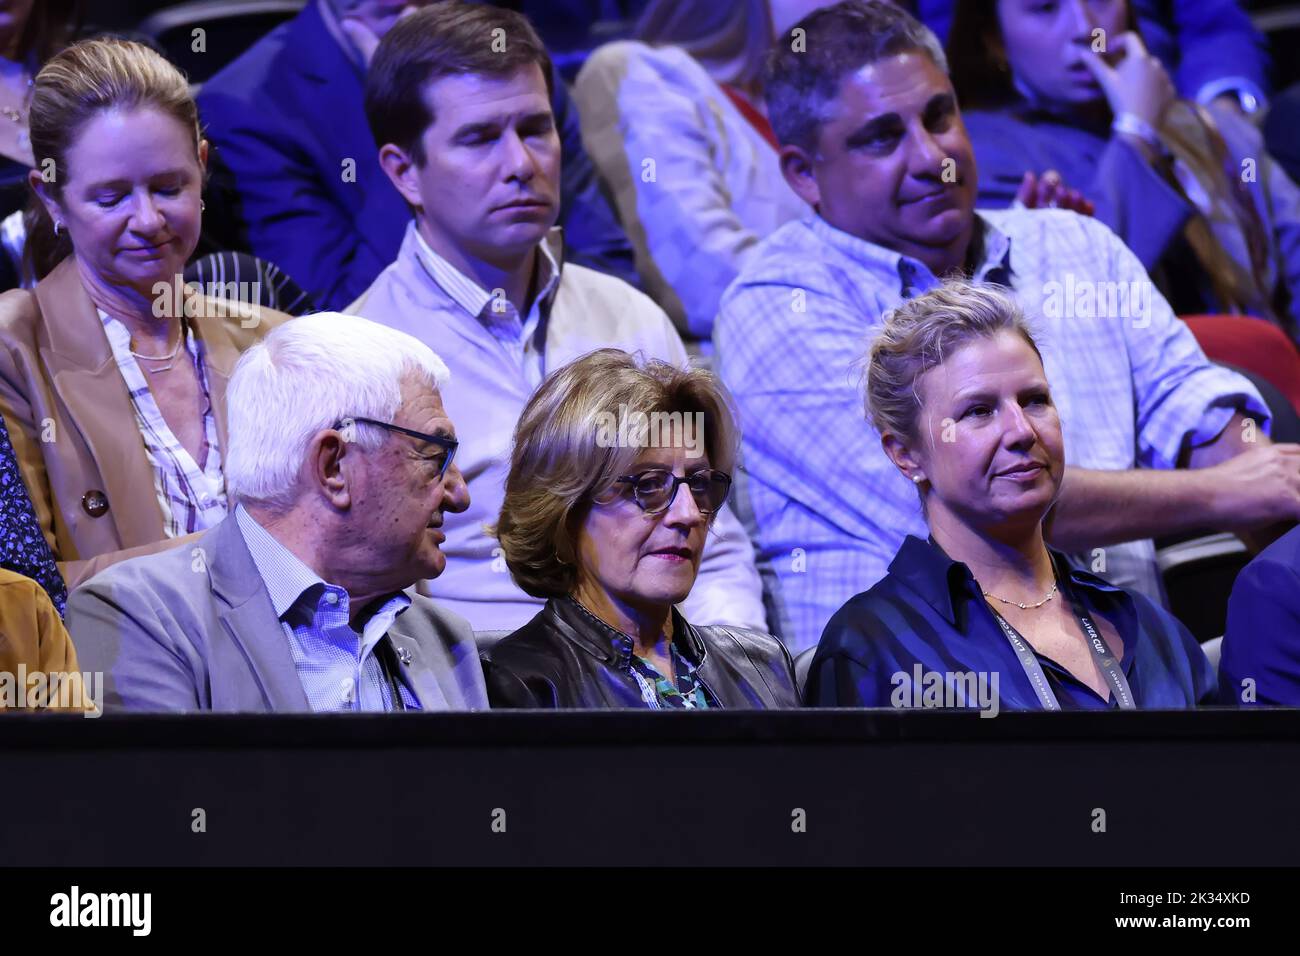 24th September 2022; O2, London England: Laver Cup international tennis tournament: Mirka Federer sits in the crowd with Lynette Federer and Robert Federer Stock Photo